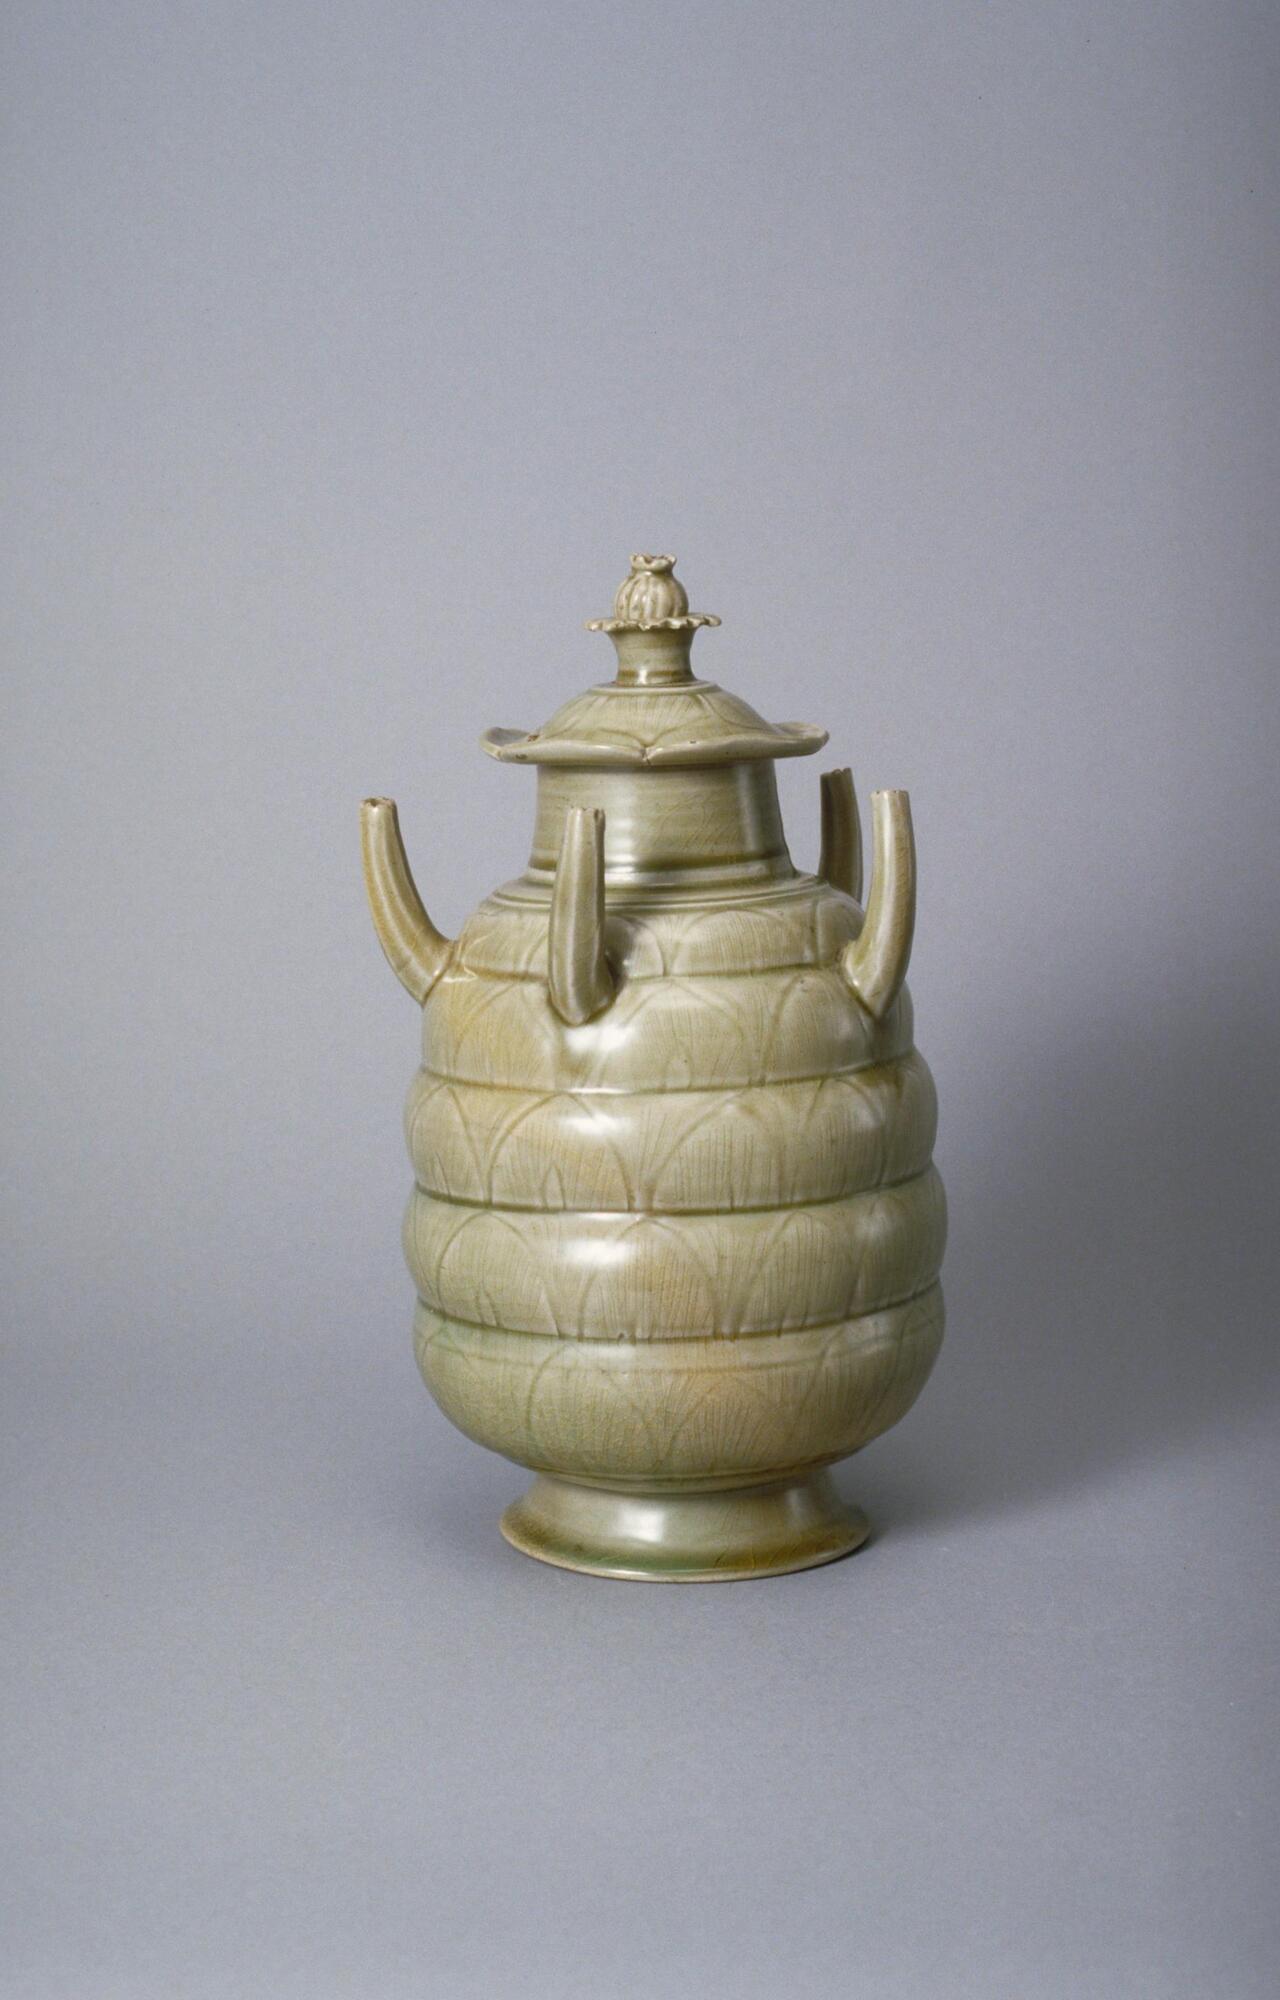 A buff stoneware jar rising up from a tall foot ring in an elongated globular body with lobes tapering towards the mouth. This jar has incised decoration, and five tubes evenly spaced and protruding upwards from the shoulder. The mouth is covered with a high domed lid, incised, and topped with a lotus bud finial. The jar is covered in an olive green celadon glaze.